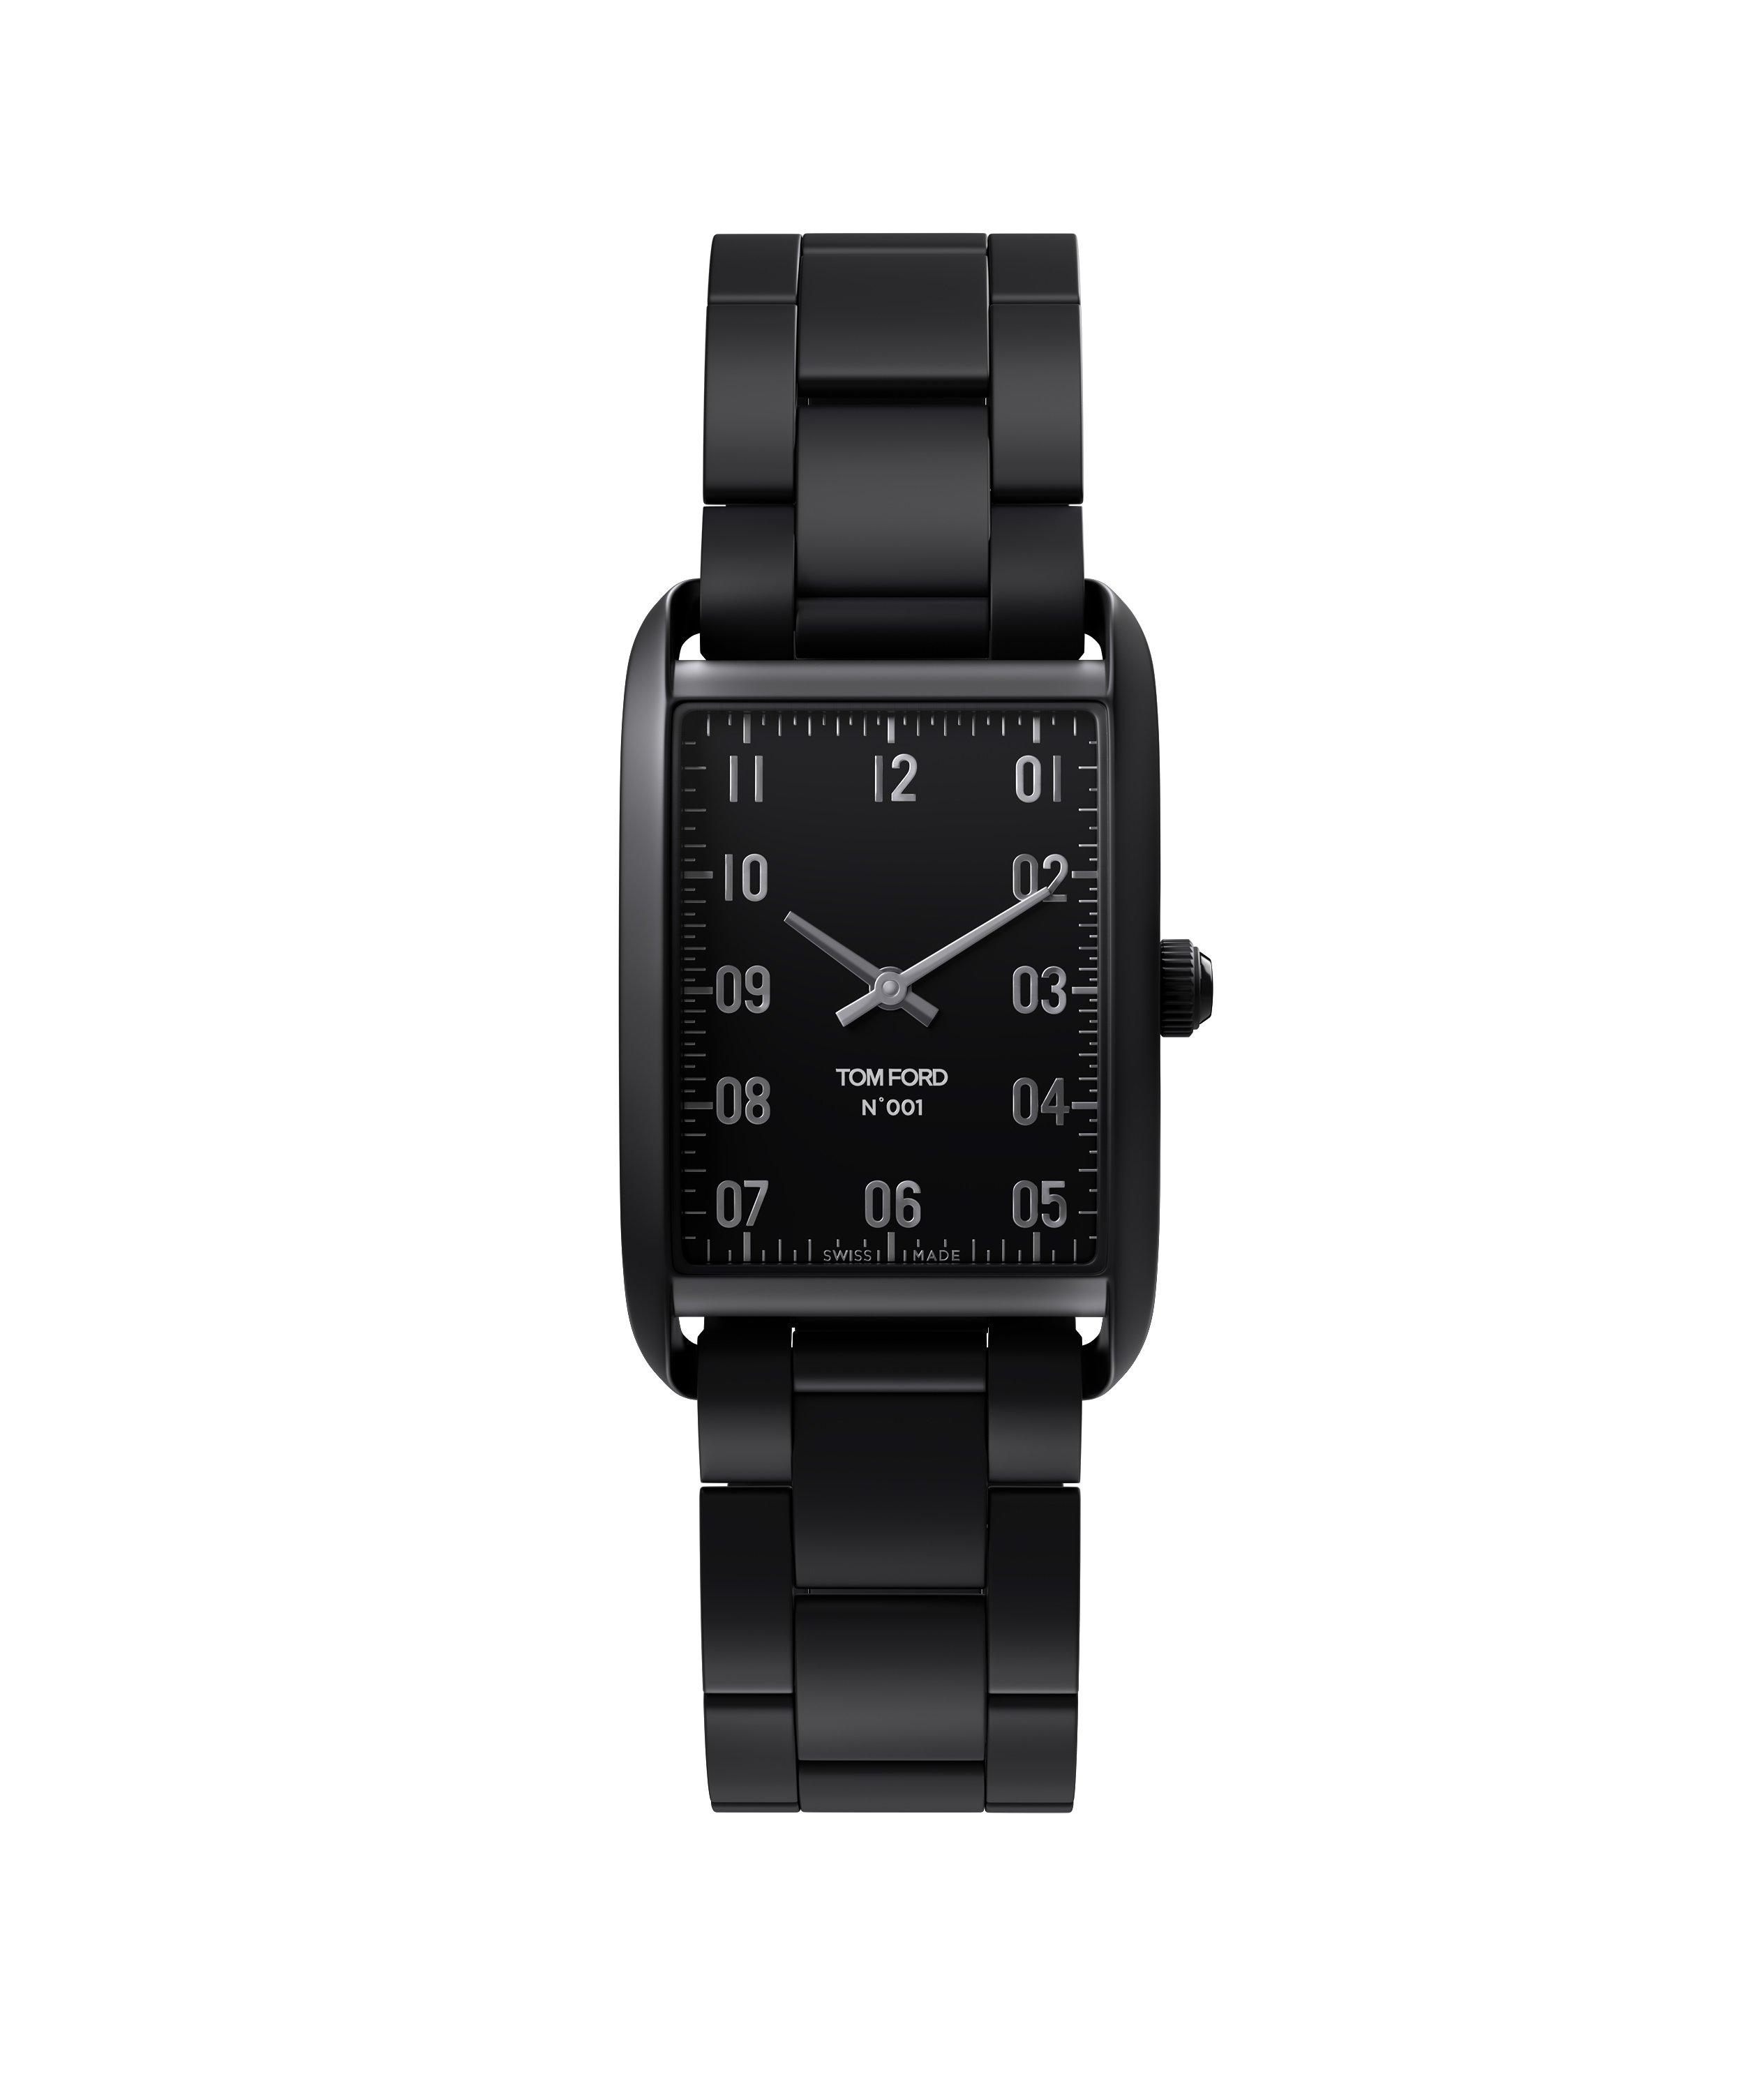 Tom Ford No.001 Matte DLC Coated Stainless Steel Watch | Watches ...